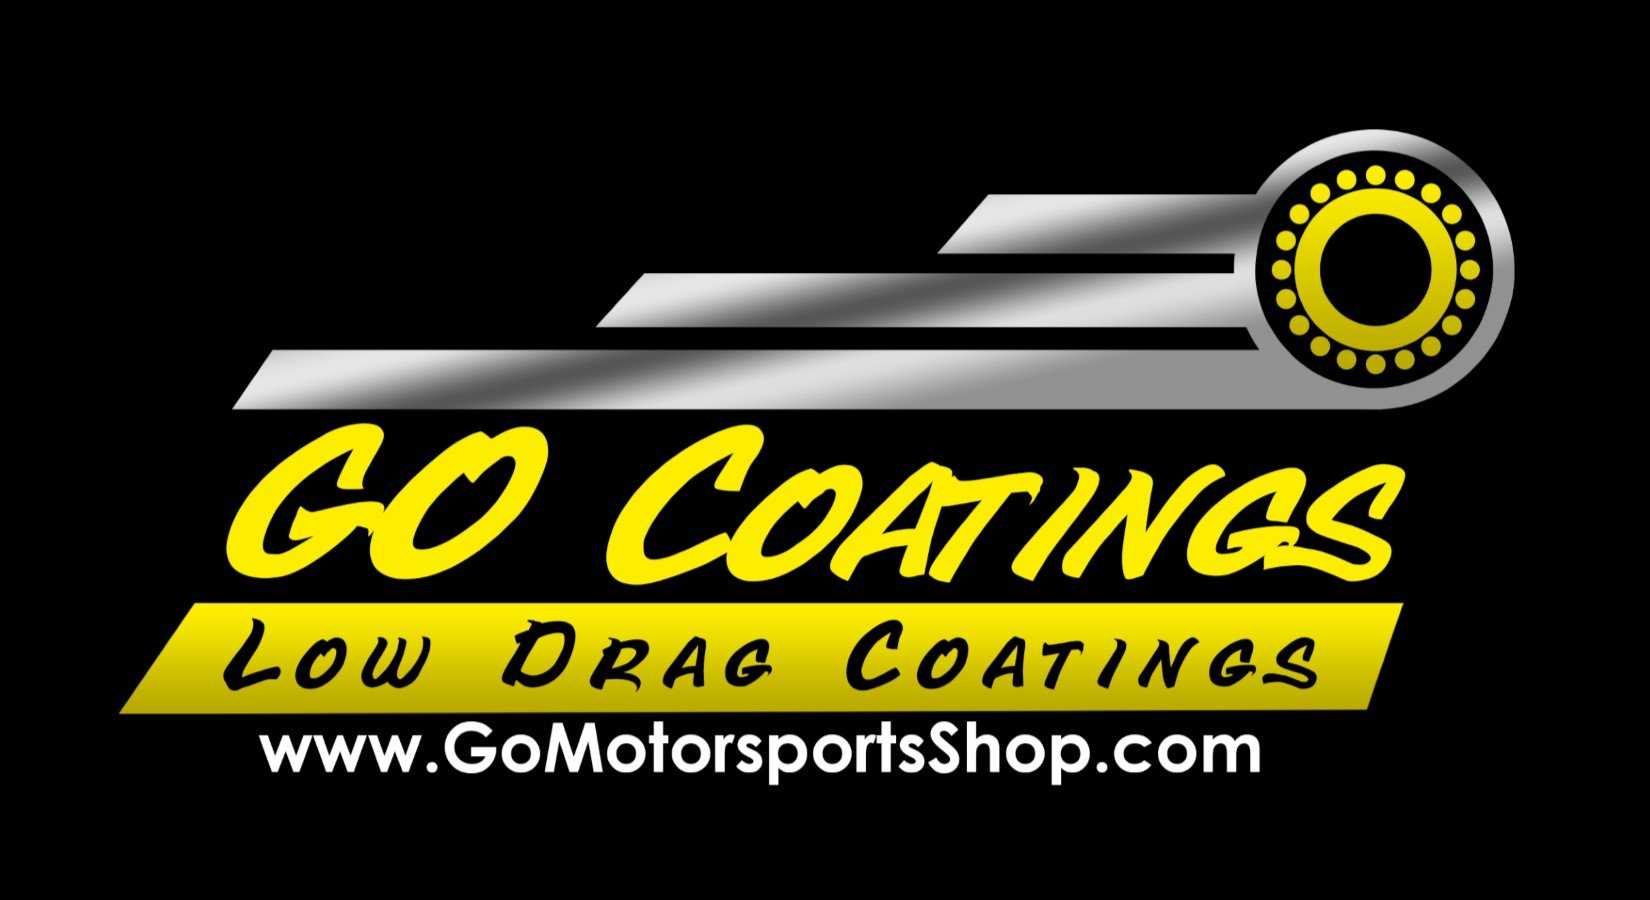 Connected Inventory, GO Coatings | Complete Low Drag Bandolero Kit (Bearings & Chain)